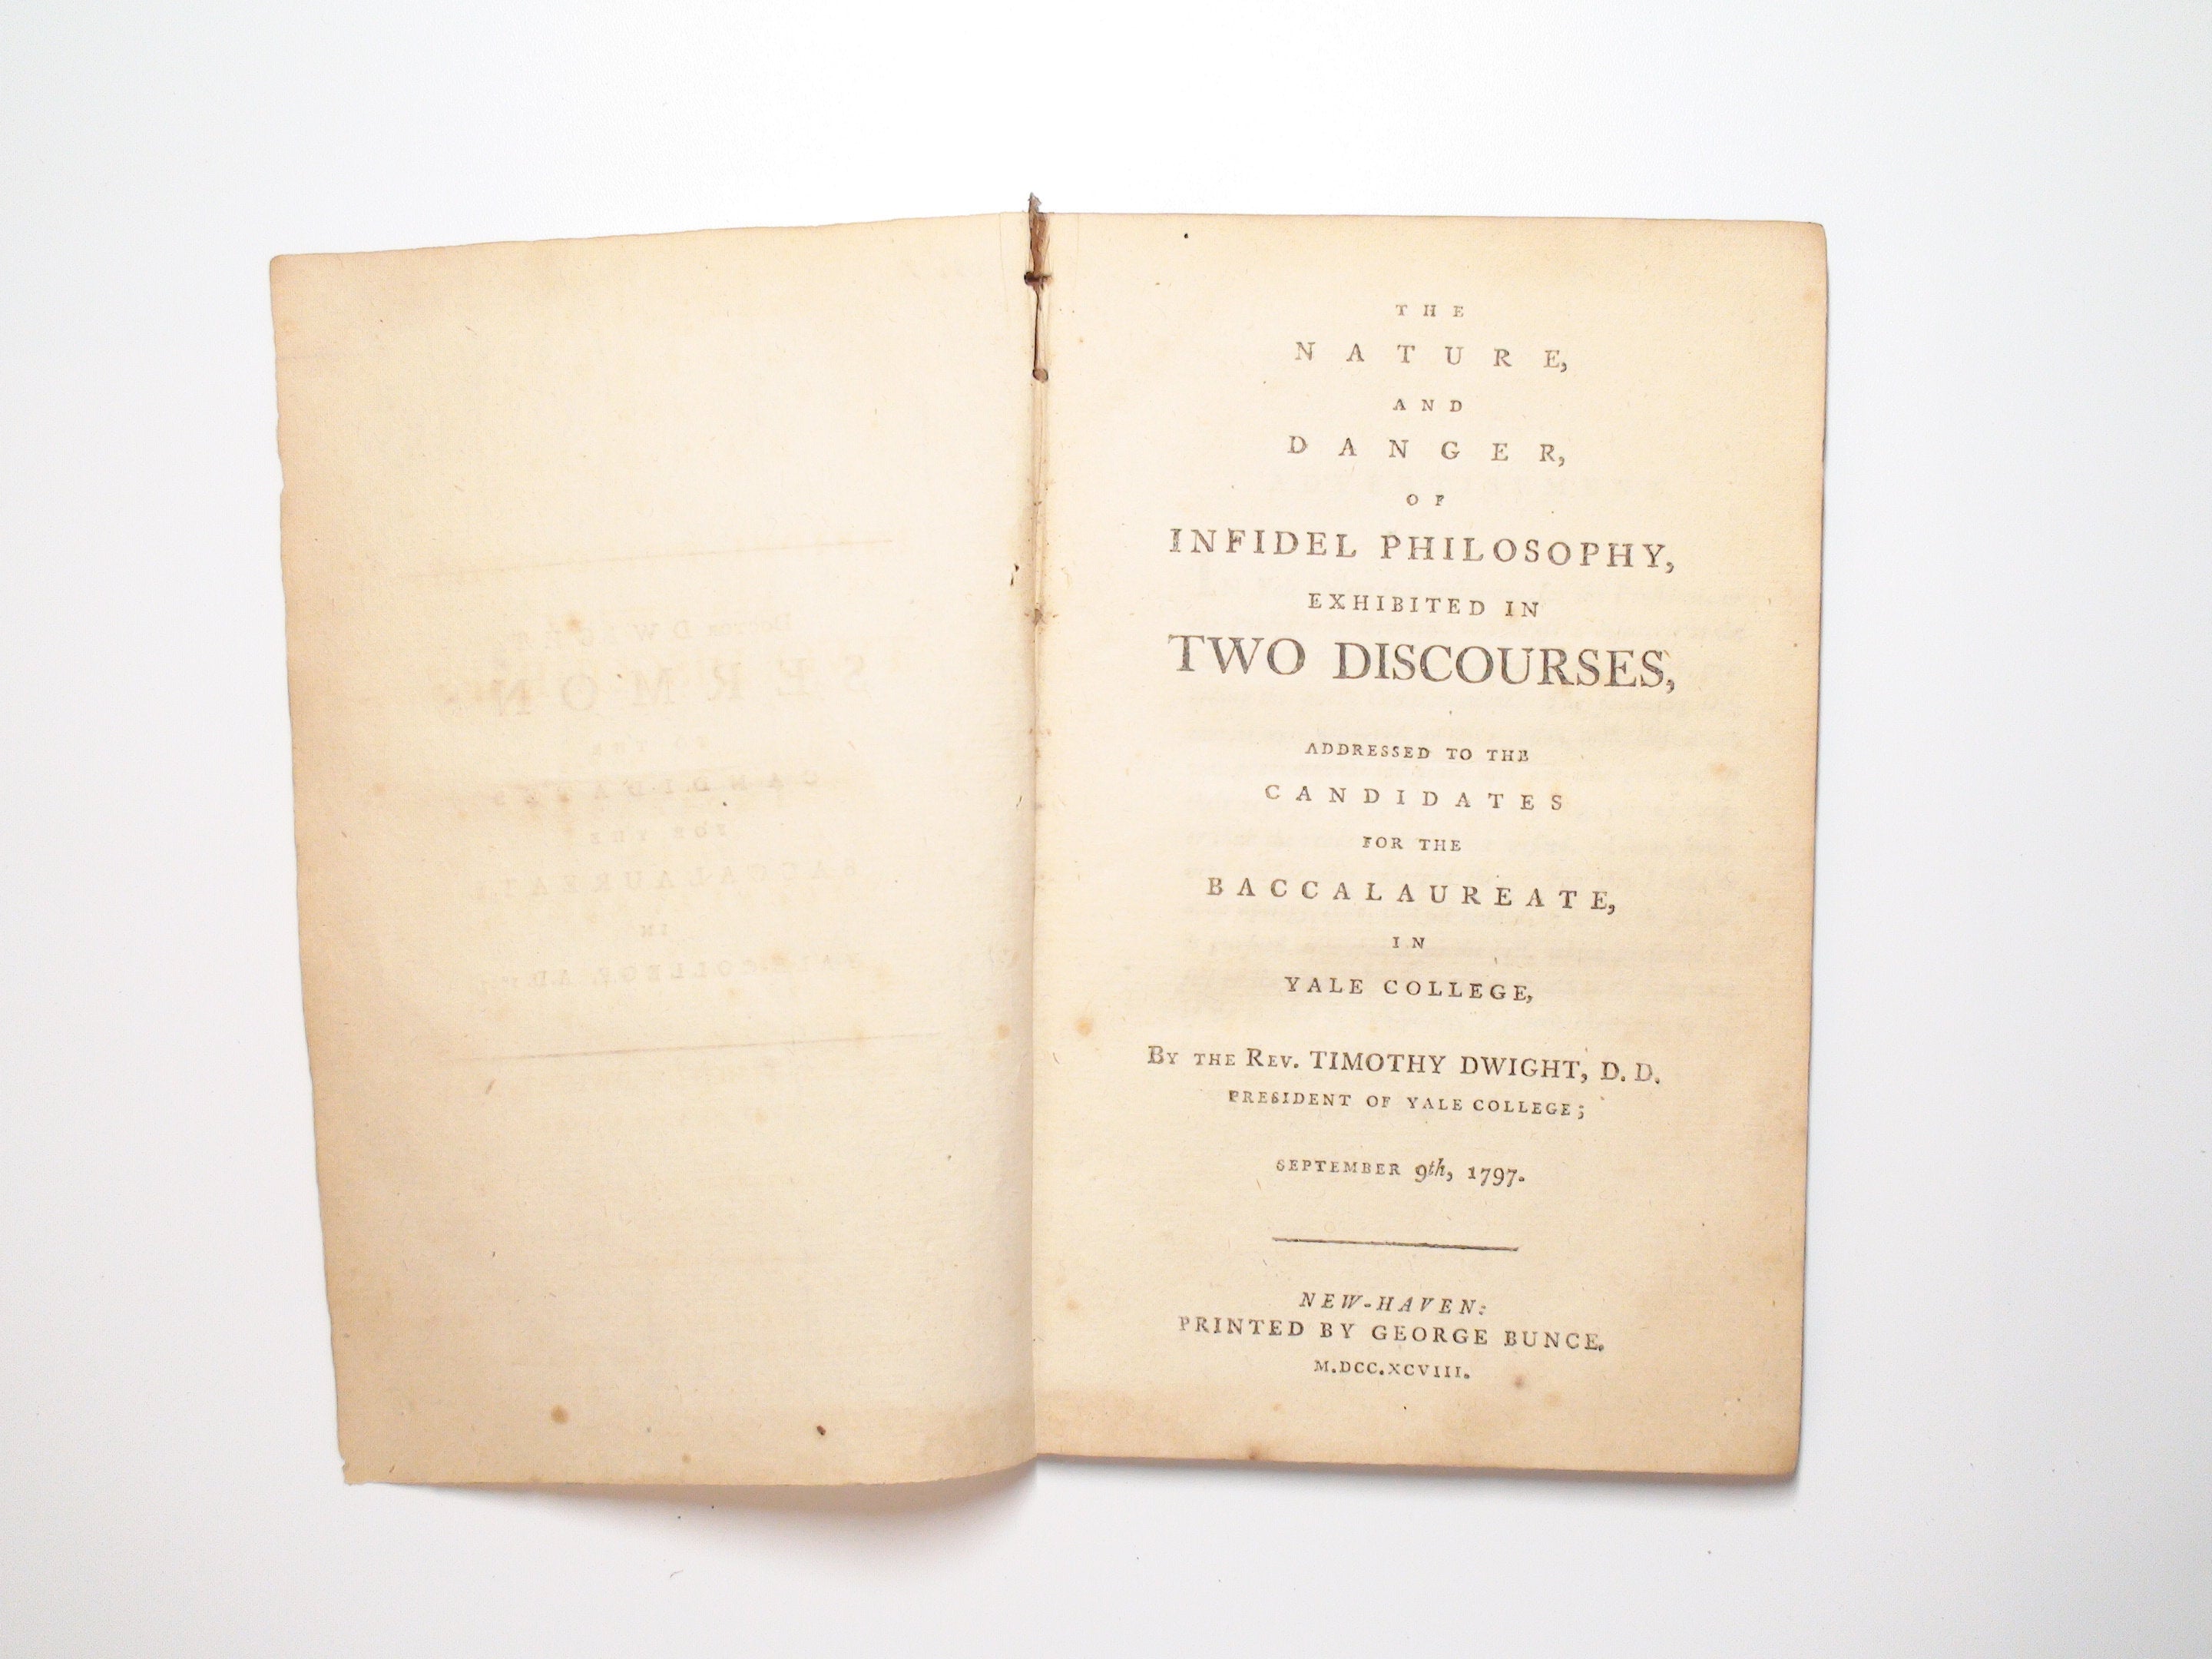 The Nature and Danger of Infidel Philosophy, Rev. Timothy Dwight, Rare, 1798